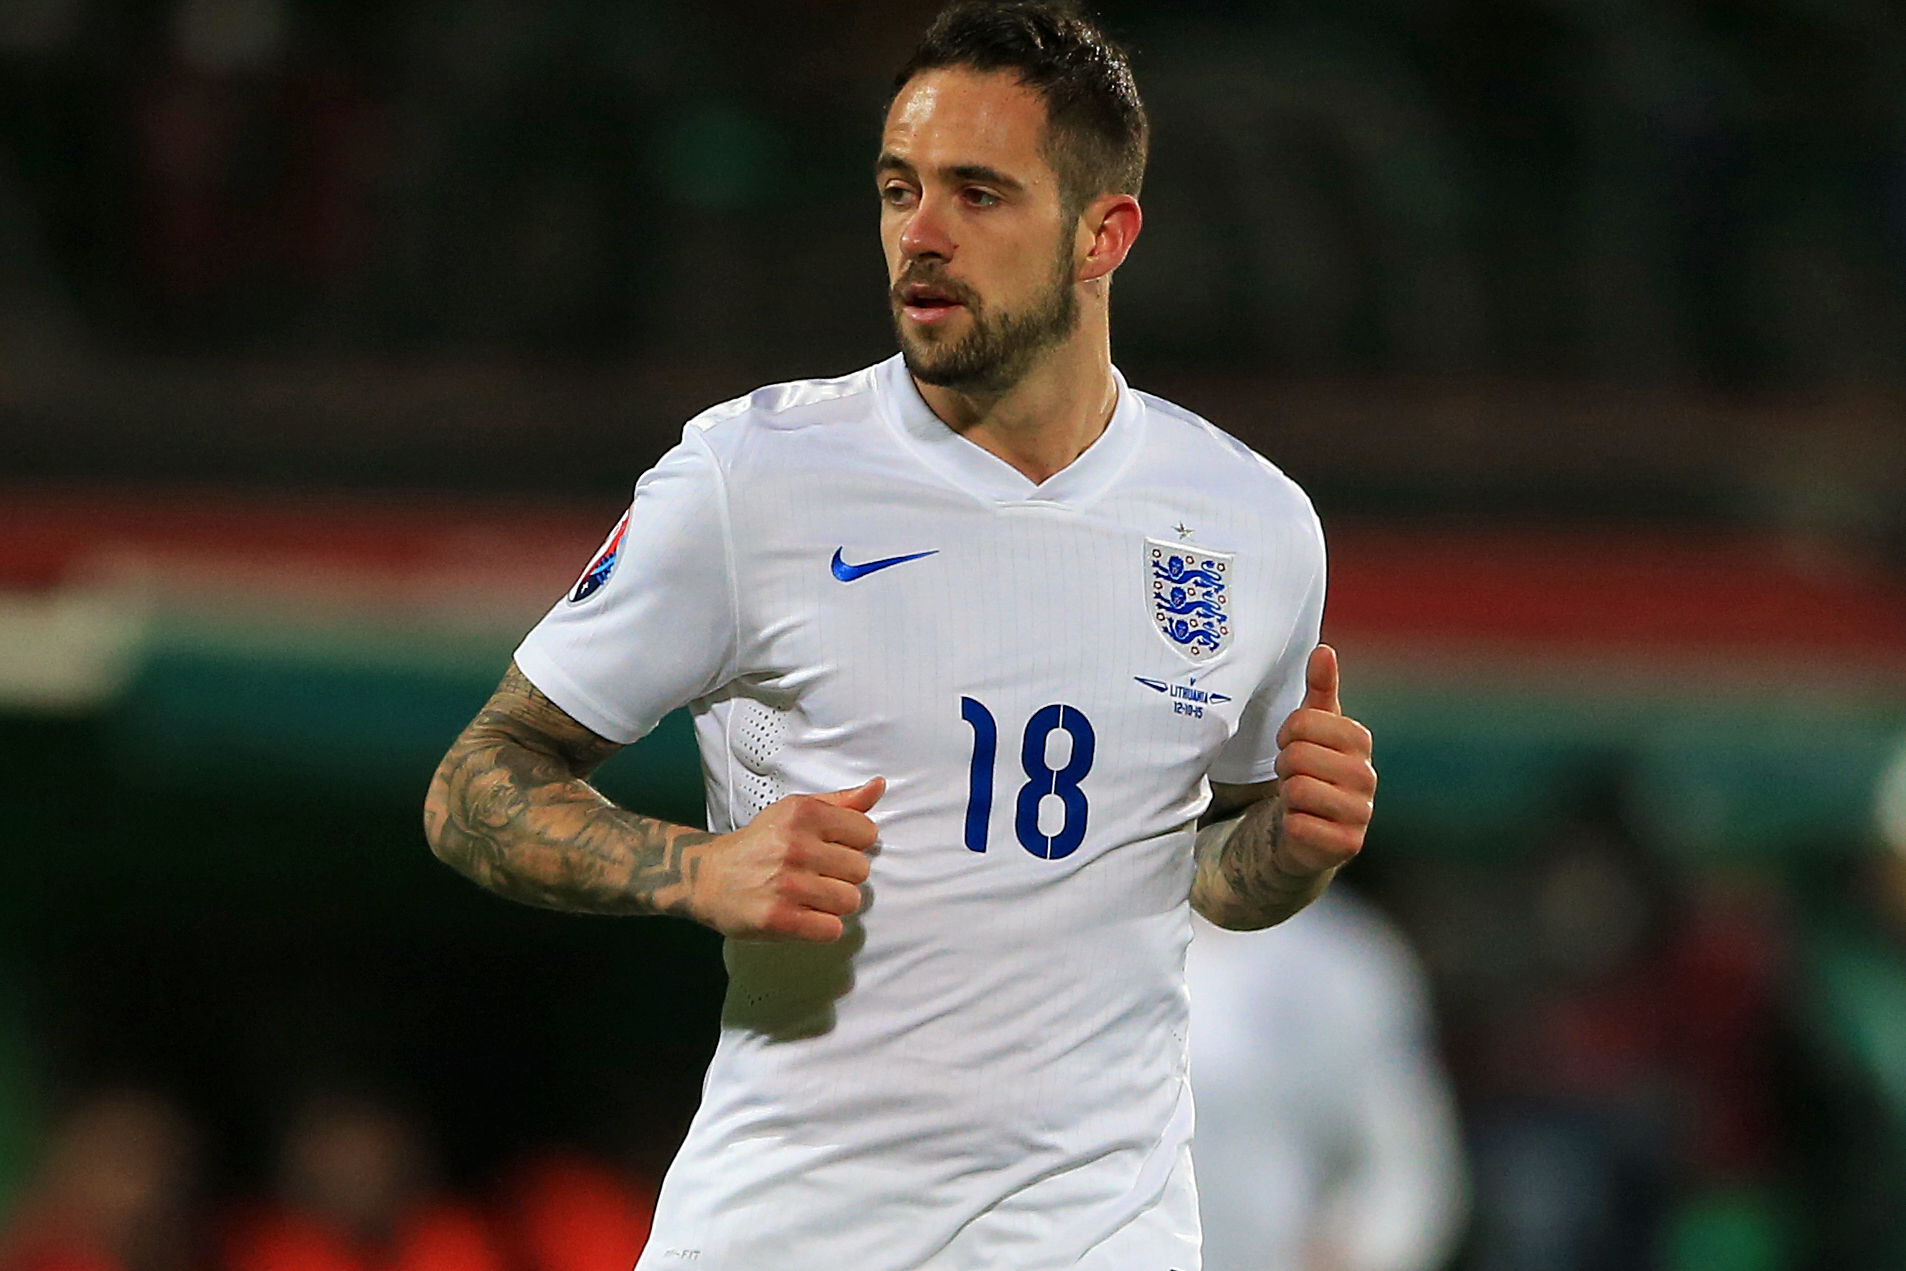 'It was something for me to work towards' – Ings was driven by desire to earn more England caps